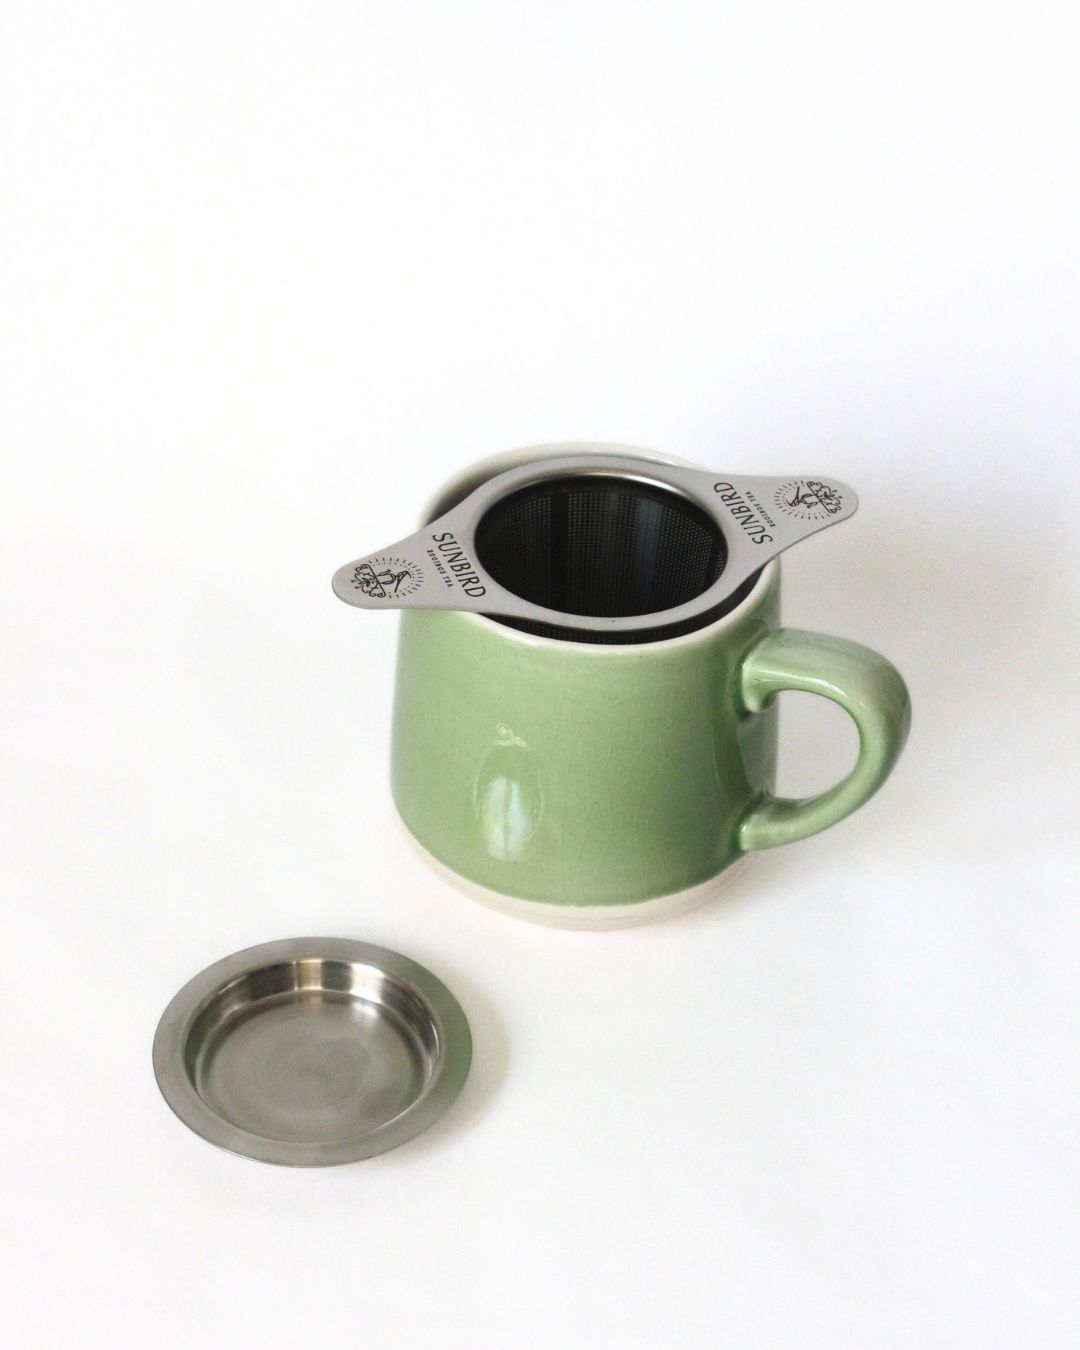 Double-handle tea infuser with a lid